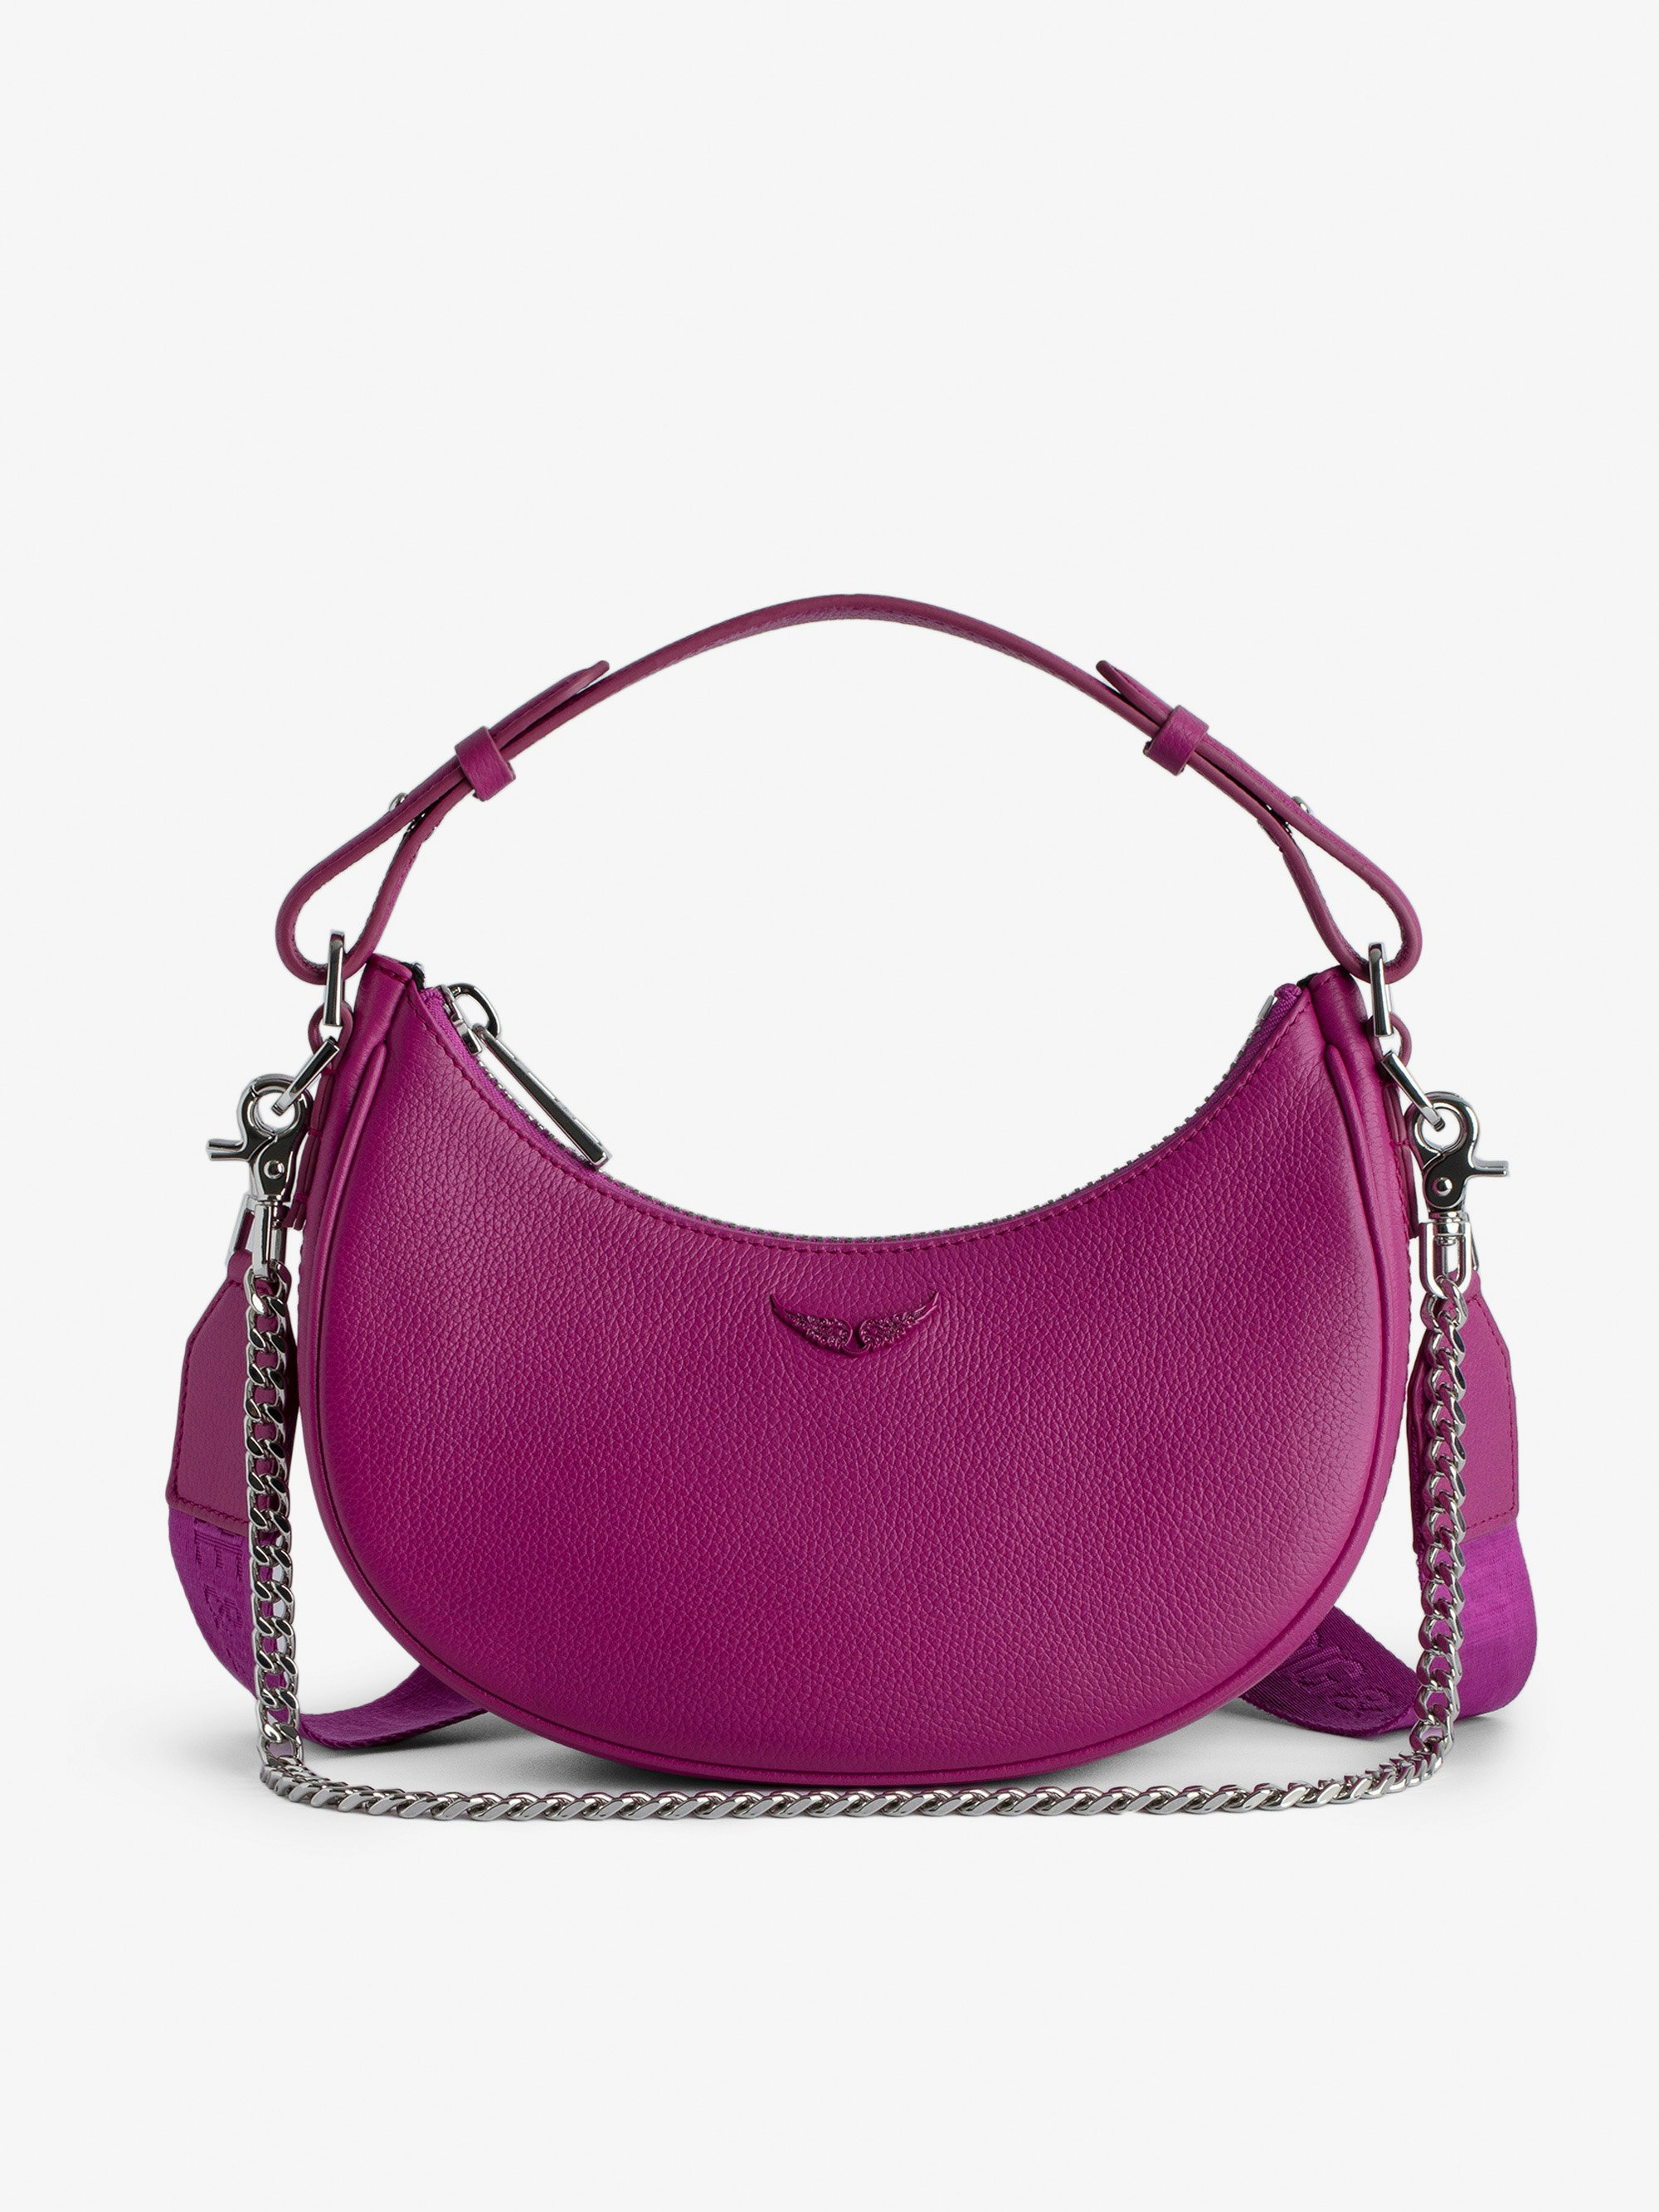 Moonrock Bag - Fuchsia grained leather half-moon bag with handle and chain shoulder strap.